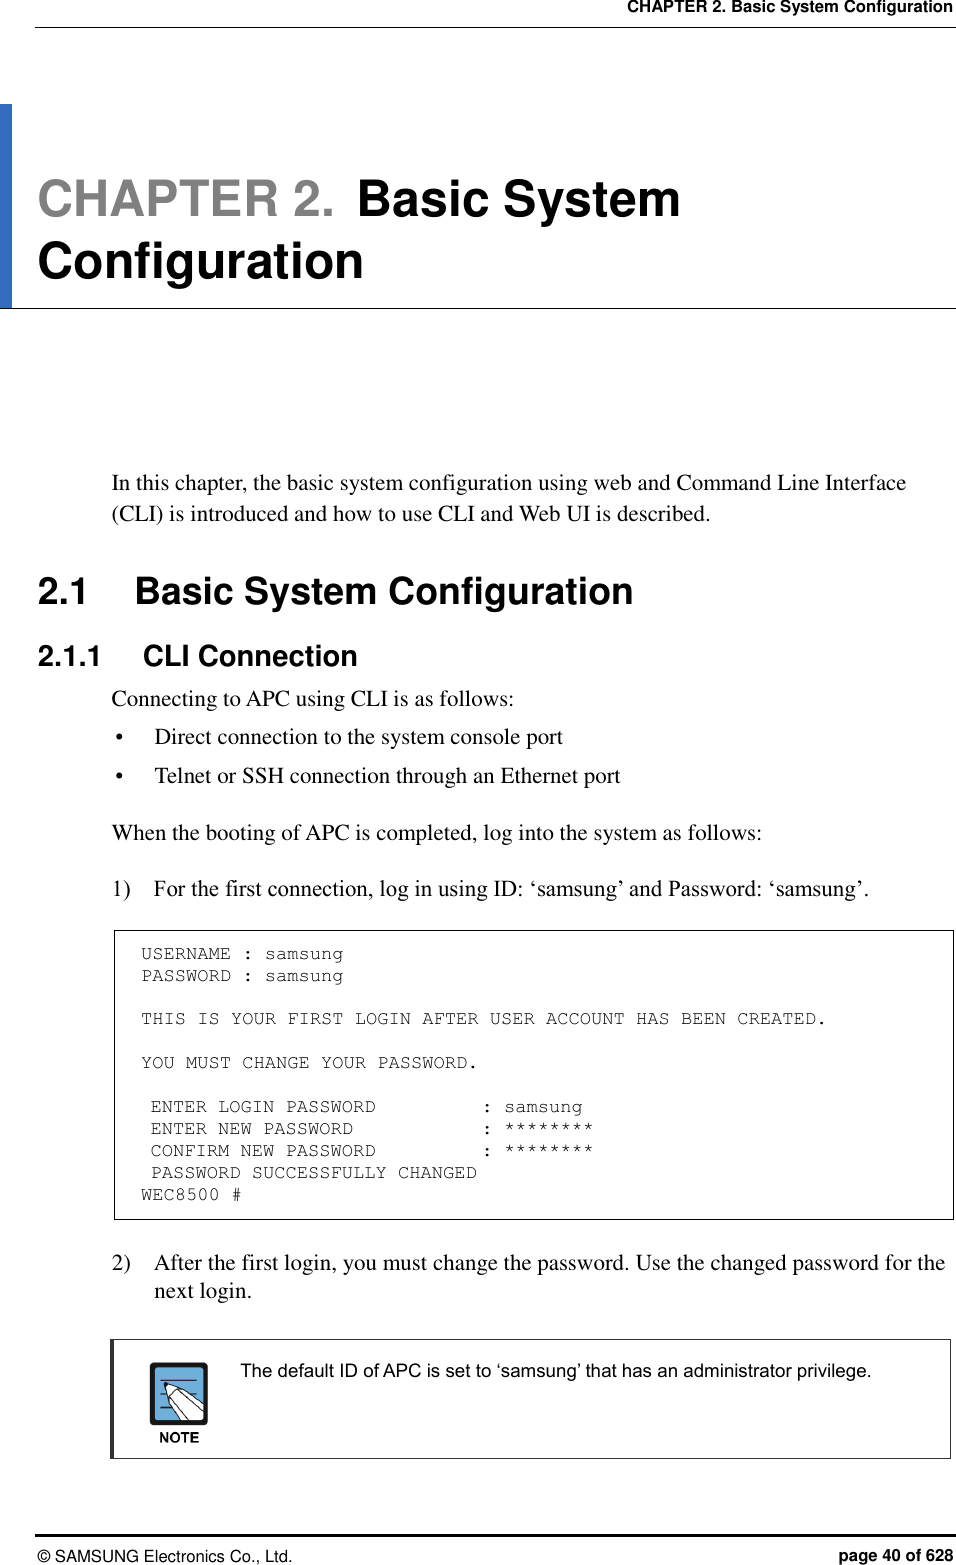 CHAPTER 2. Basic System Configuration ©  SAMSUNG Electronics Co., Ltd.  page 40 of 628 CHAPTER 2. Basic System Configuration      In this chapter, the basic system configuration using web and Command Line Interface (CLI) is introduced and how to use CLI and Web UI is described.  2.1  Basic System Configuration 2.1.1  CLI Connection Connecting to APC using CLI is as follows:  Direct connection to the system console port  Telnet or SSH connection through an Ethernet port  When the booting of APC is completed, log into the system as follows:  1)    For the first connection, log in using ID: ‘samsung’ and Password: ‘samsung’.  USERNAME : samsung PASSWORD : samsung  THIS IS YOUR FIRST LOGIN AFTER USER ACCOUNT HAS BEEN CREATED.  YOU MUST CHANGE YOUR PASSWORD.   ENTER LOGIN PASSWORD    : samsung  ENTER NEW PASSWORD       : ********  CONFIRM NEW PASSWORD    : ********  PASSWORD SUCCESSFULLY CHANGED WEC8500 #  2)    After the first login, you must change the password. Use the changed password for the next login.     The default ID of APC is set to ‘samsung’ that has an administrator privilege.     